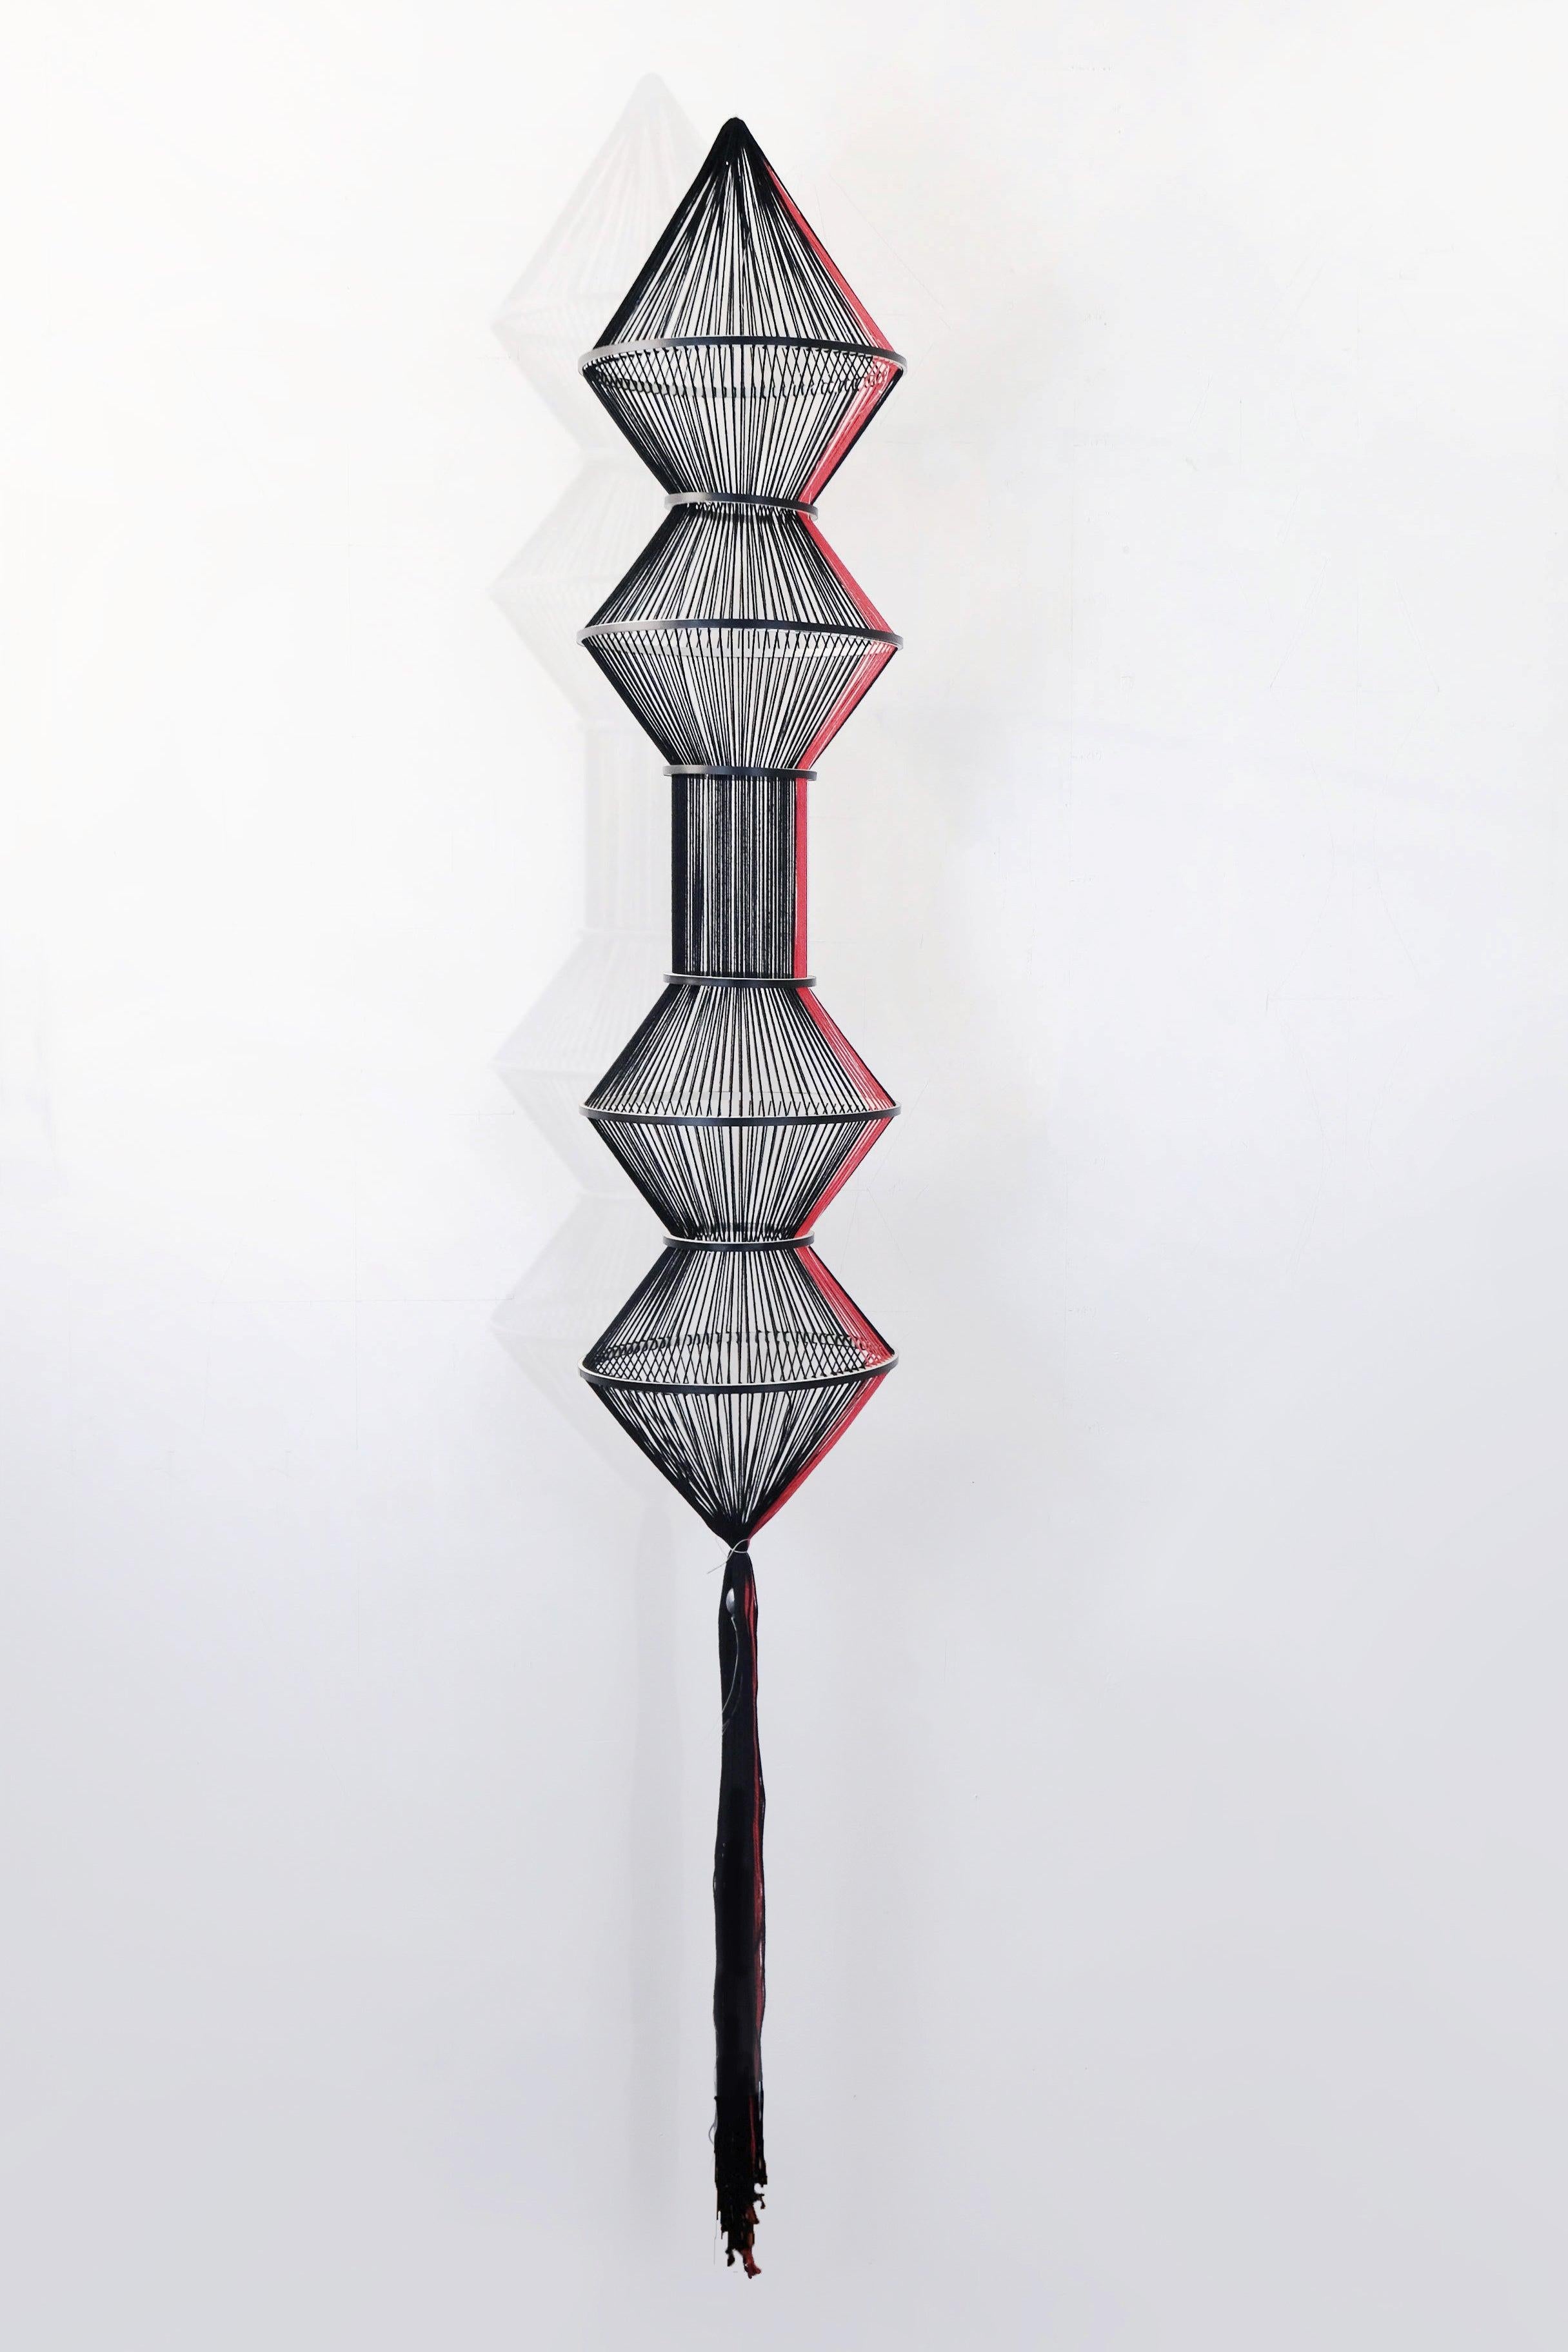 Weave #1 - contemporary abstract hanging sculpture, red, black, thread, wool - Art by Sofia Escobar